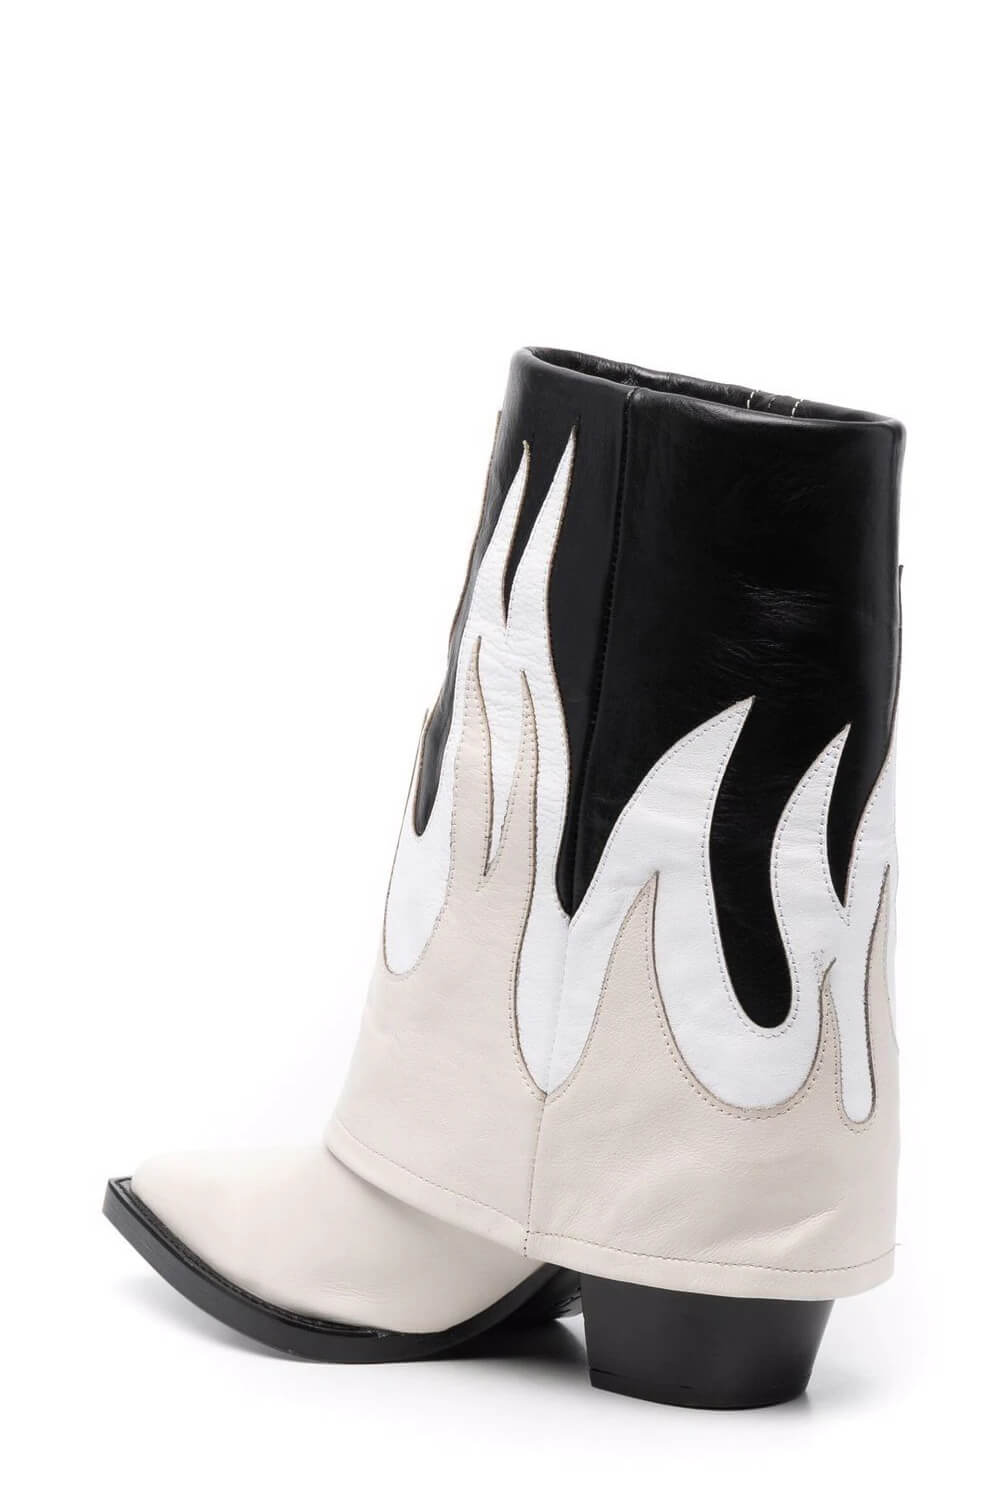 Fire Western Cowboy Fold Over Pointed Toe Block Heel Ankle Boots - Cream